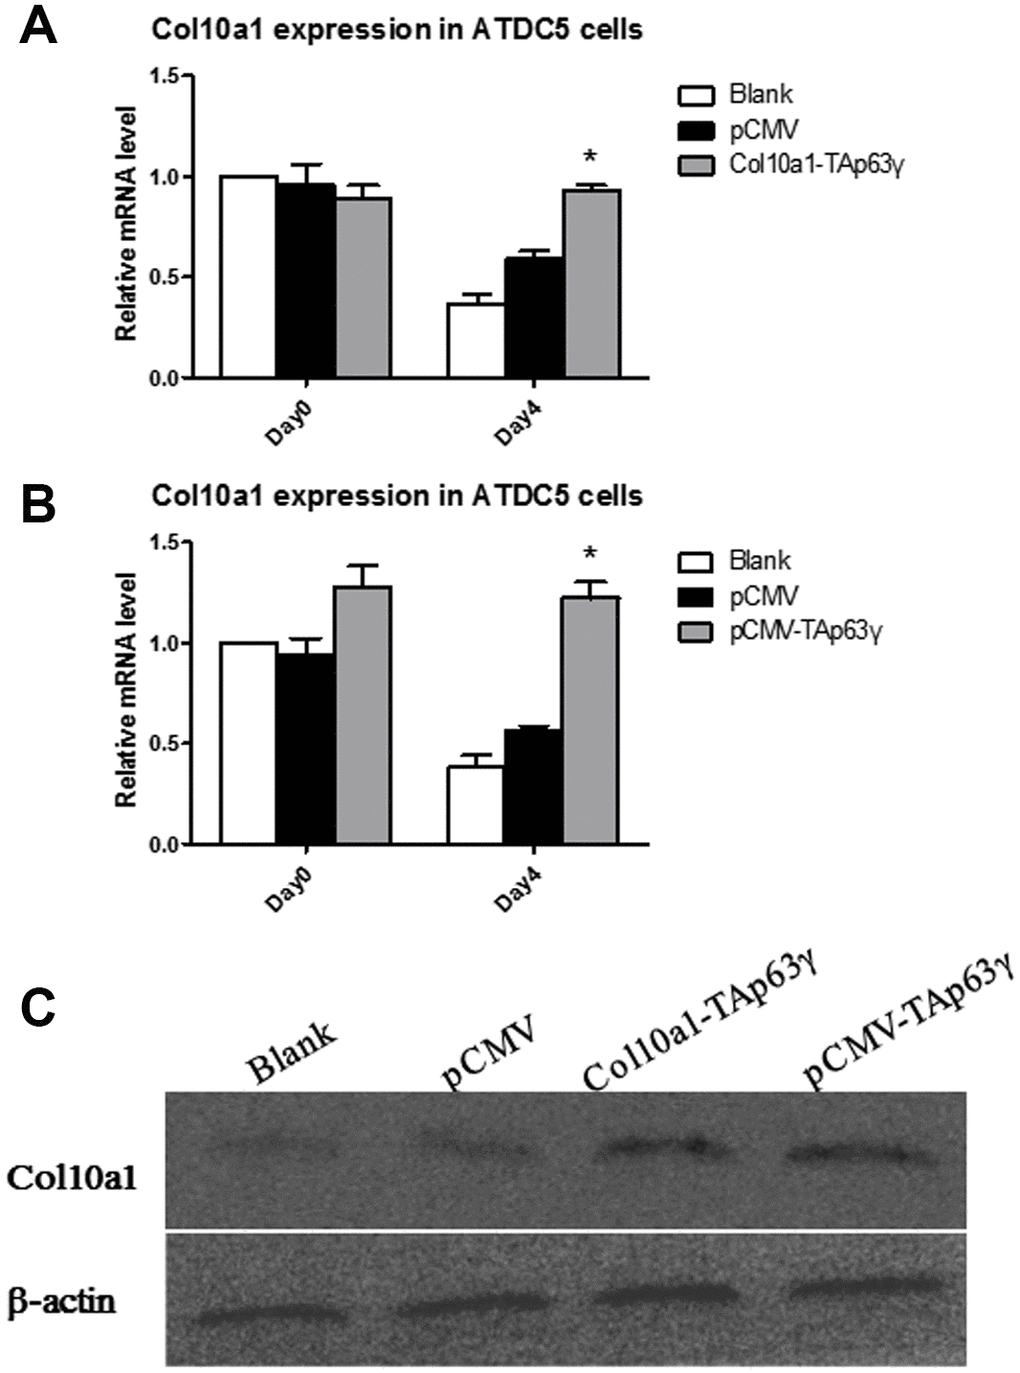 TAp63γ upregulates Col10a1 expression in ATDC5 cells. (A) ATD5C cells were harvested for RNA isolation on day zero or after 4 days in culture. Col10a1 showed significant elevation in Col10a1-TAp63γ stable cell lines compared with the controls after 4 days in culture. (B) ATD5C cells were harvested for RNA isolation on day zero or after 4 days in culture. Col10a1 showed significant elevation in pCMV-TAp63γ stable cell lines compared with the controls after 4 days in culture. (C) The protein levels of Col10a1 in TAp63γ stable cell lines also showed upregulation of Col10a1 compared to blank and pCMV controls by western blot analysis.